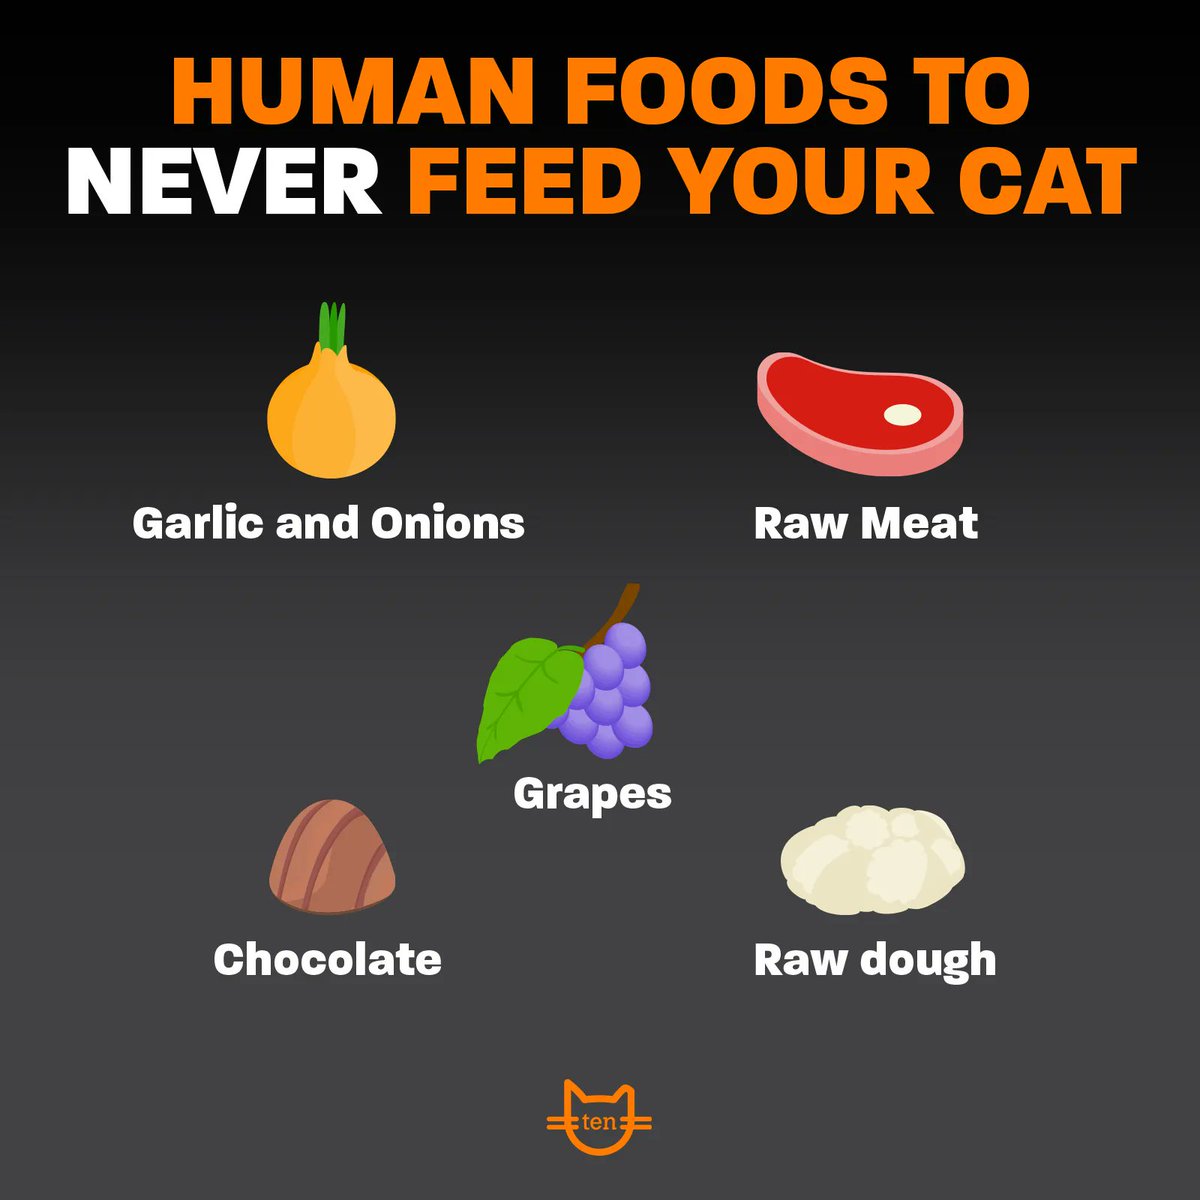 I will gladly accept filet mignon or salmon, though. 😼 Just sayin’.

#catcare #catcaretips #catownertips #catscatscats #cattips #catfacts #catownersclub #catlover